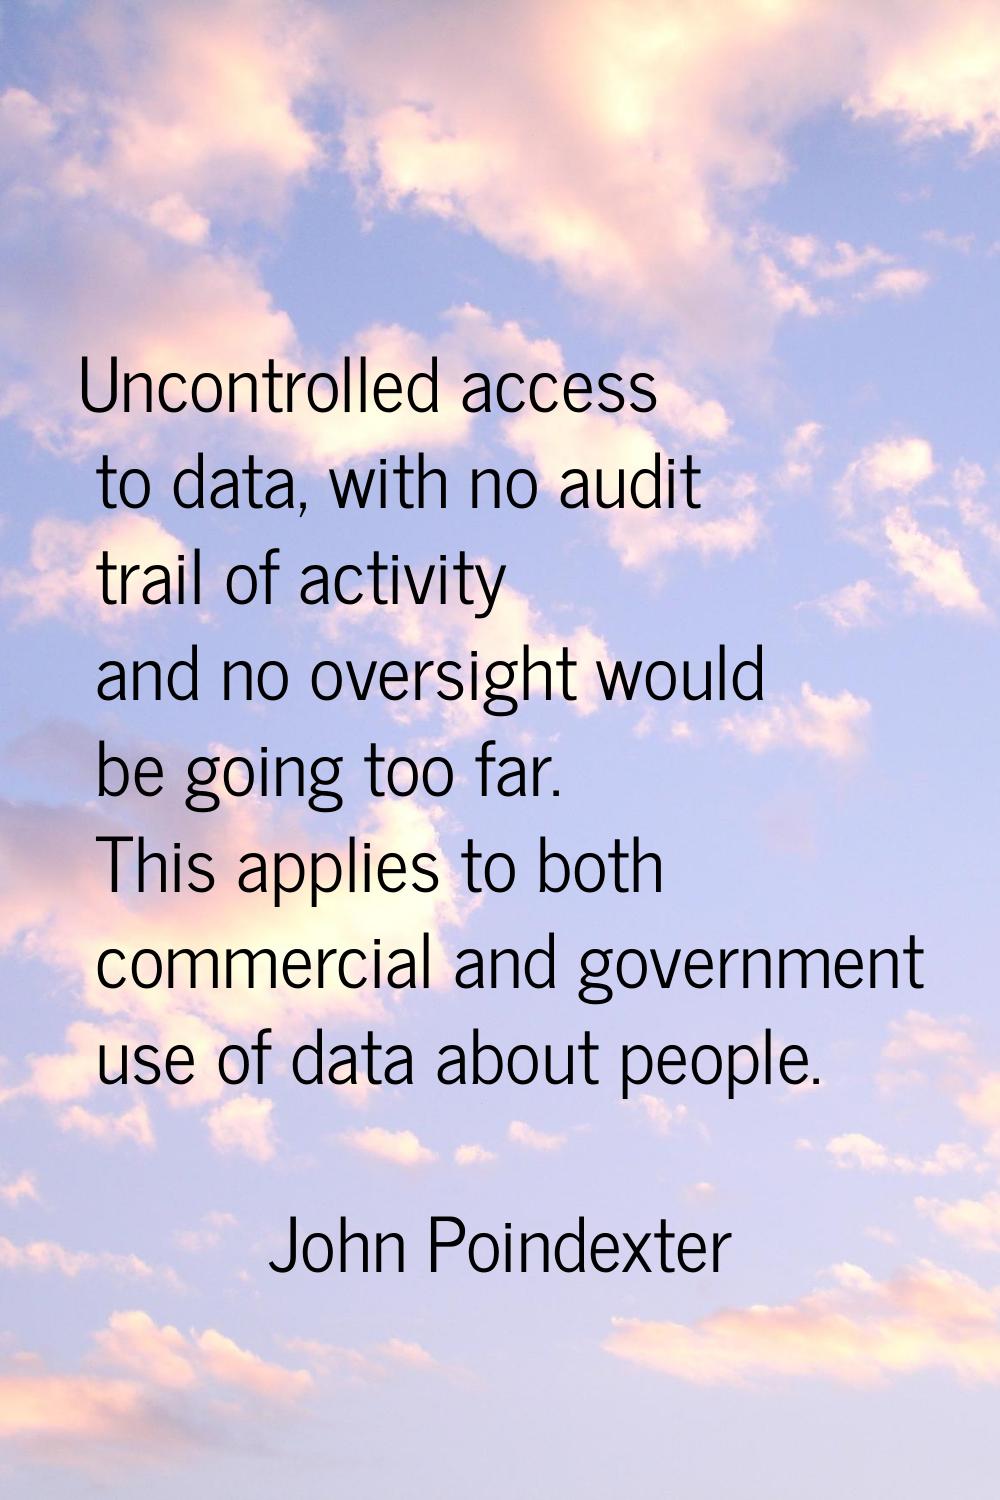 Uncontrolled access to data, with no audit trail of activity and no oversight would be going too fa